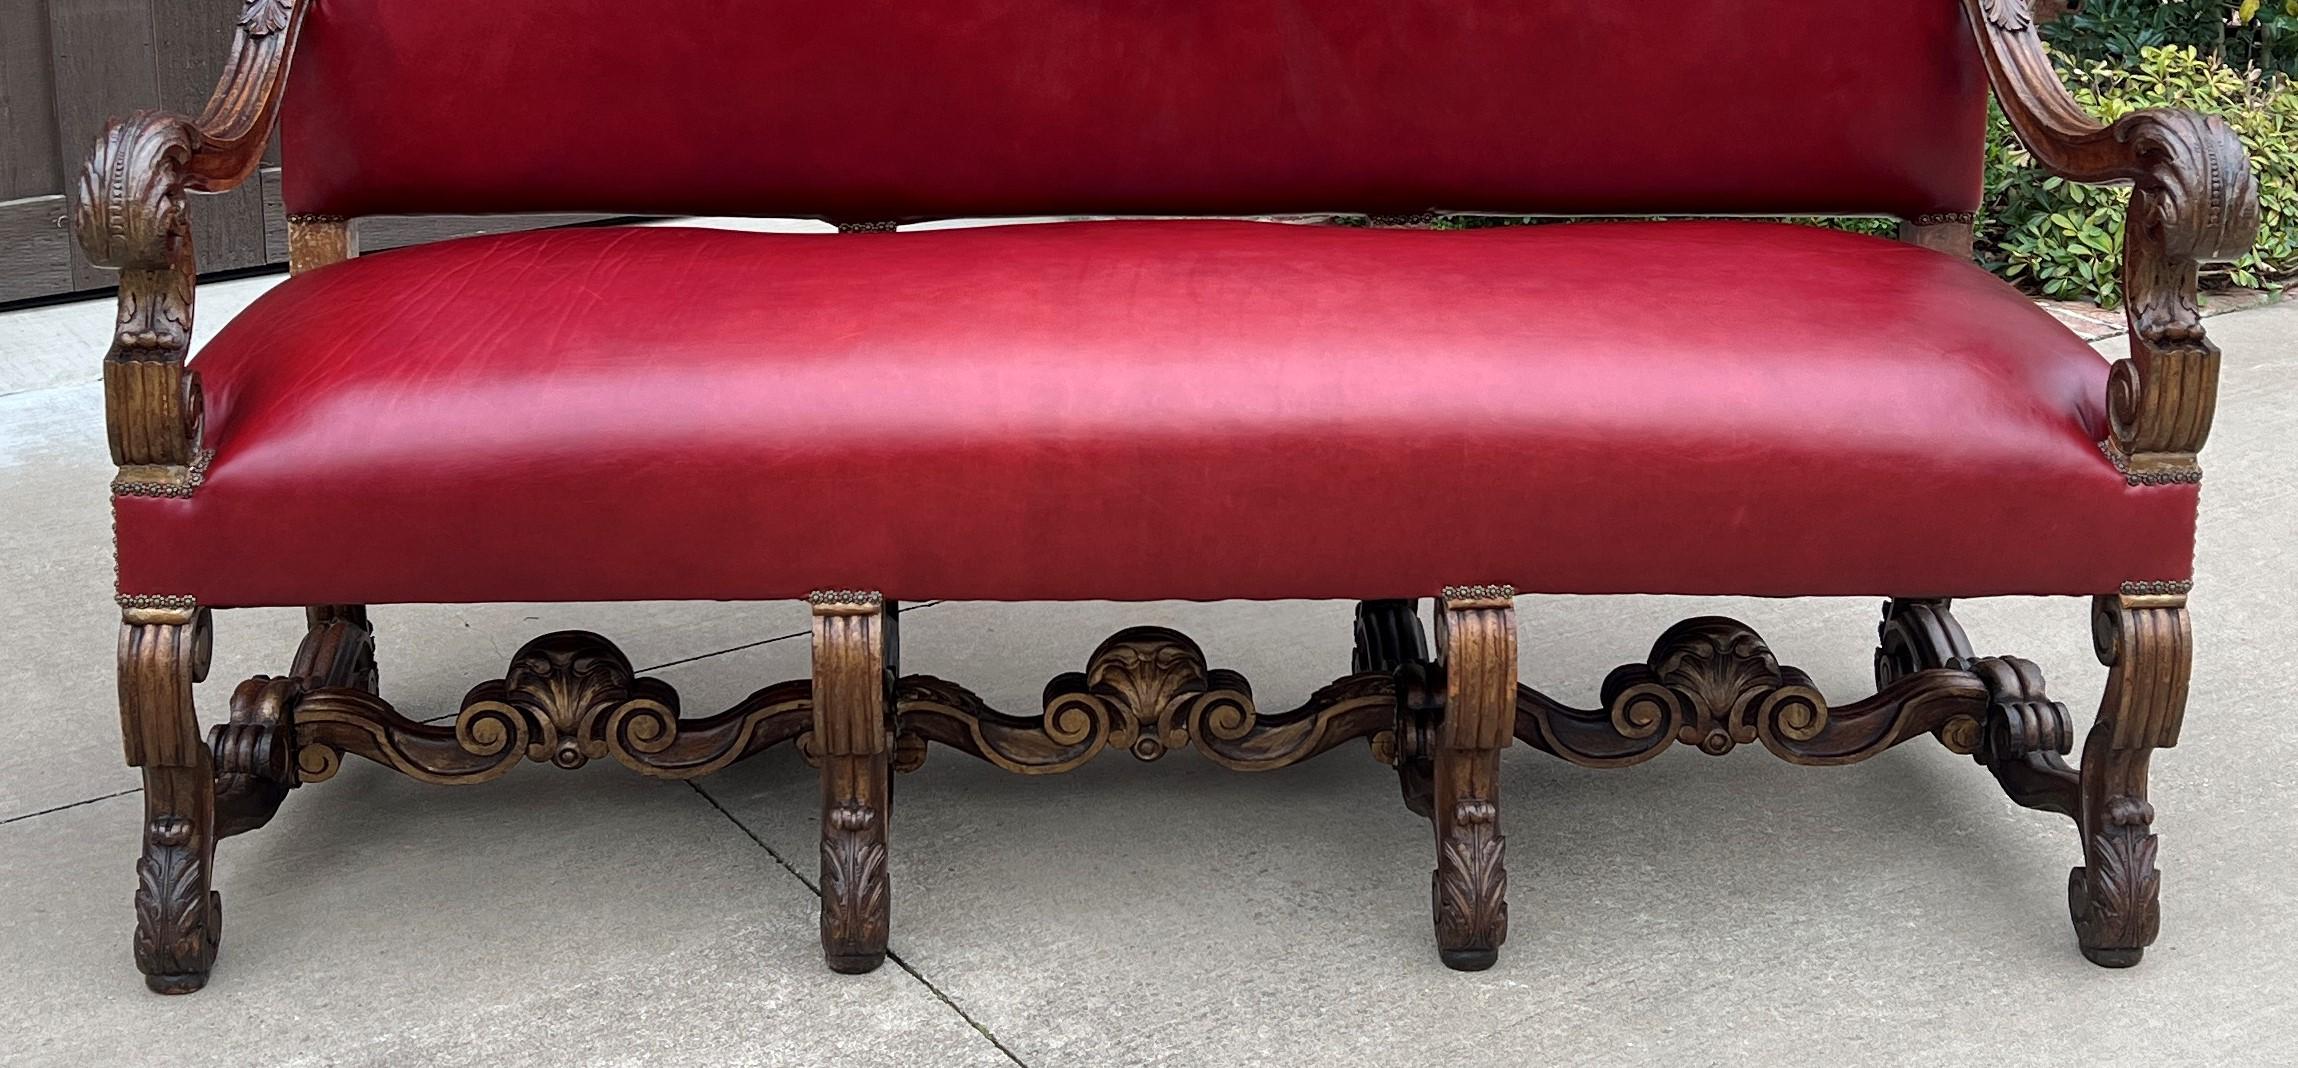 Antique Sofa Bench Settee Loveseat Chair Red Upholstery Oak Western Farmhouse For Sale 2